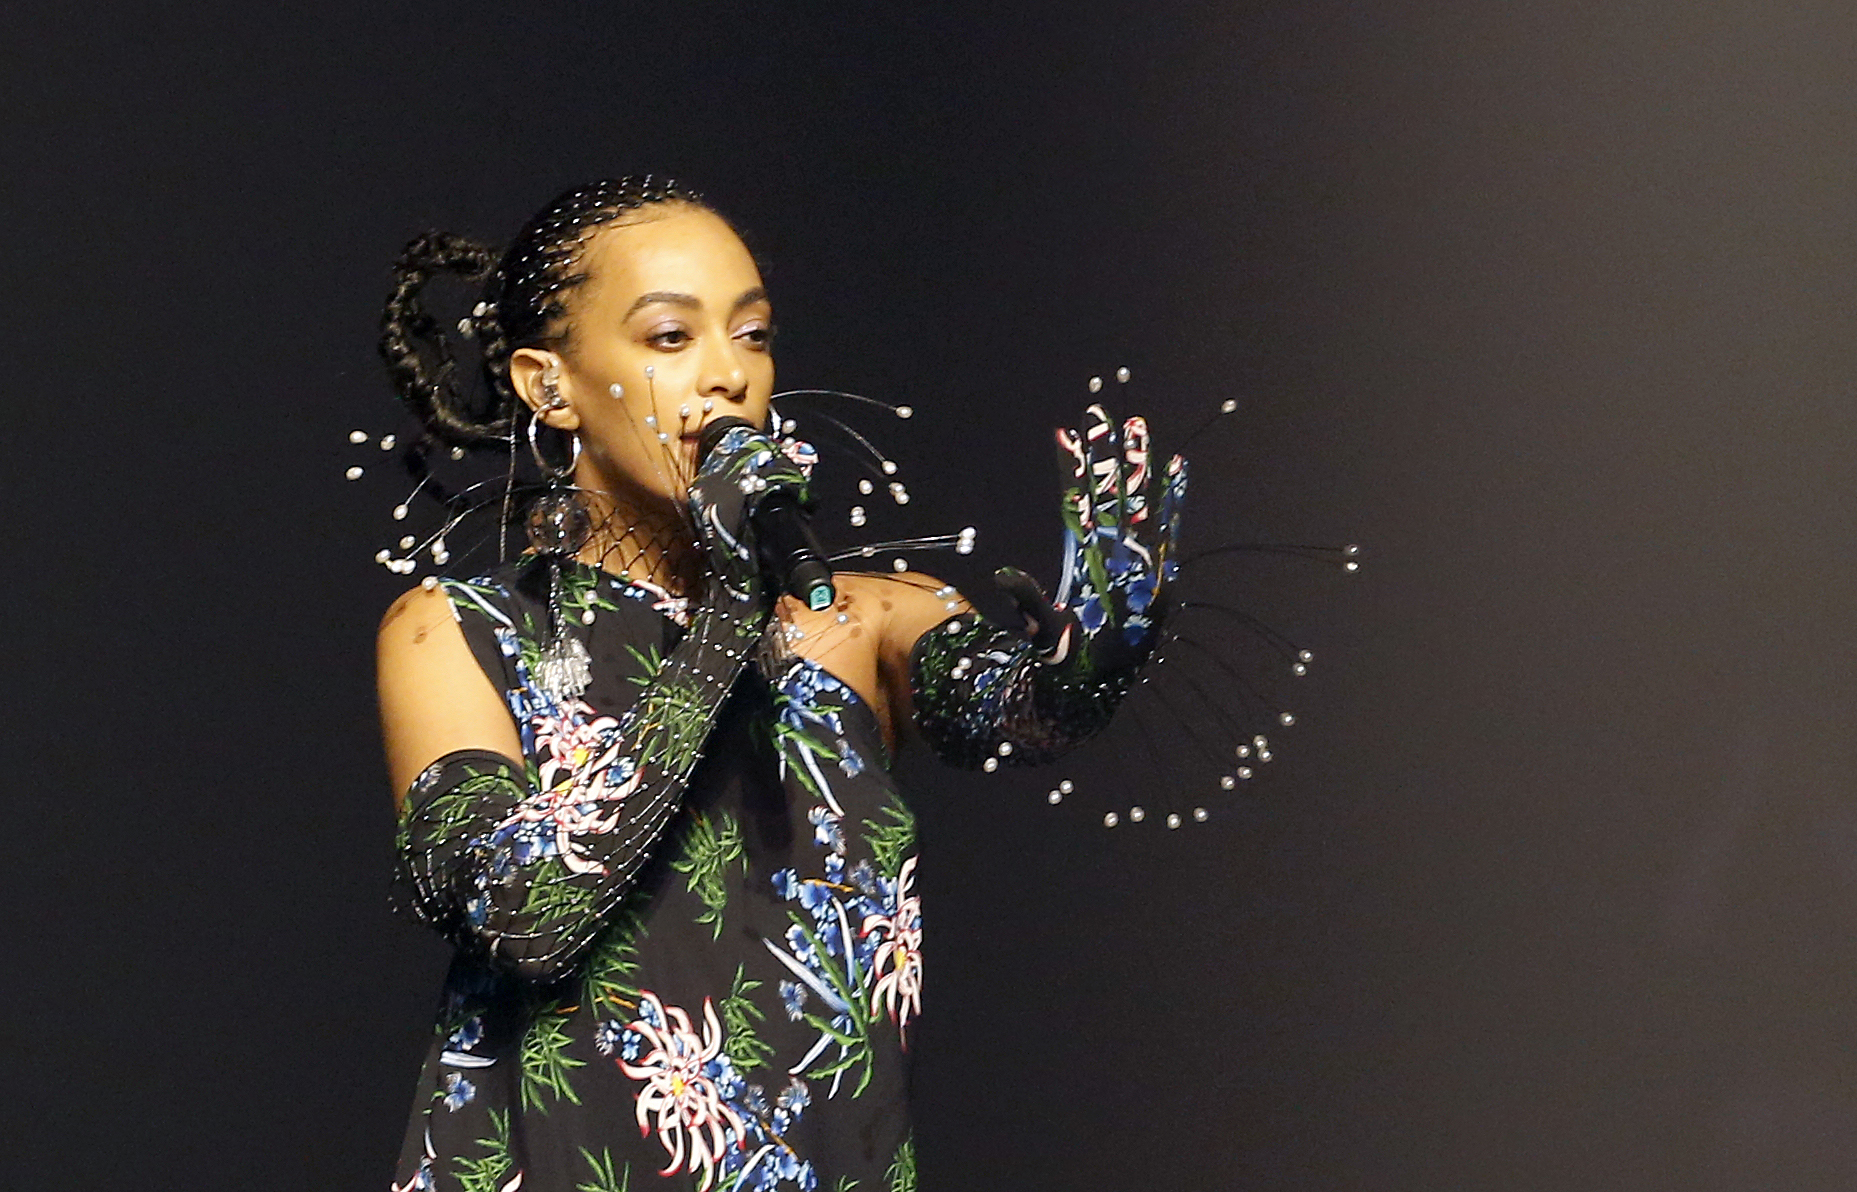 Singer Solange Knowles performs during the runway during the Kenzo Menswear Spring Summer 2020 show